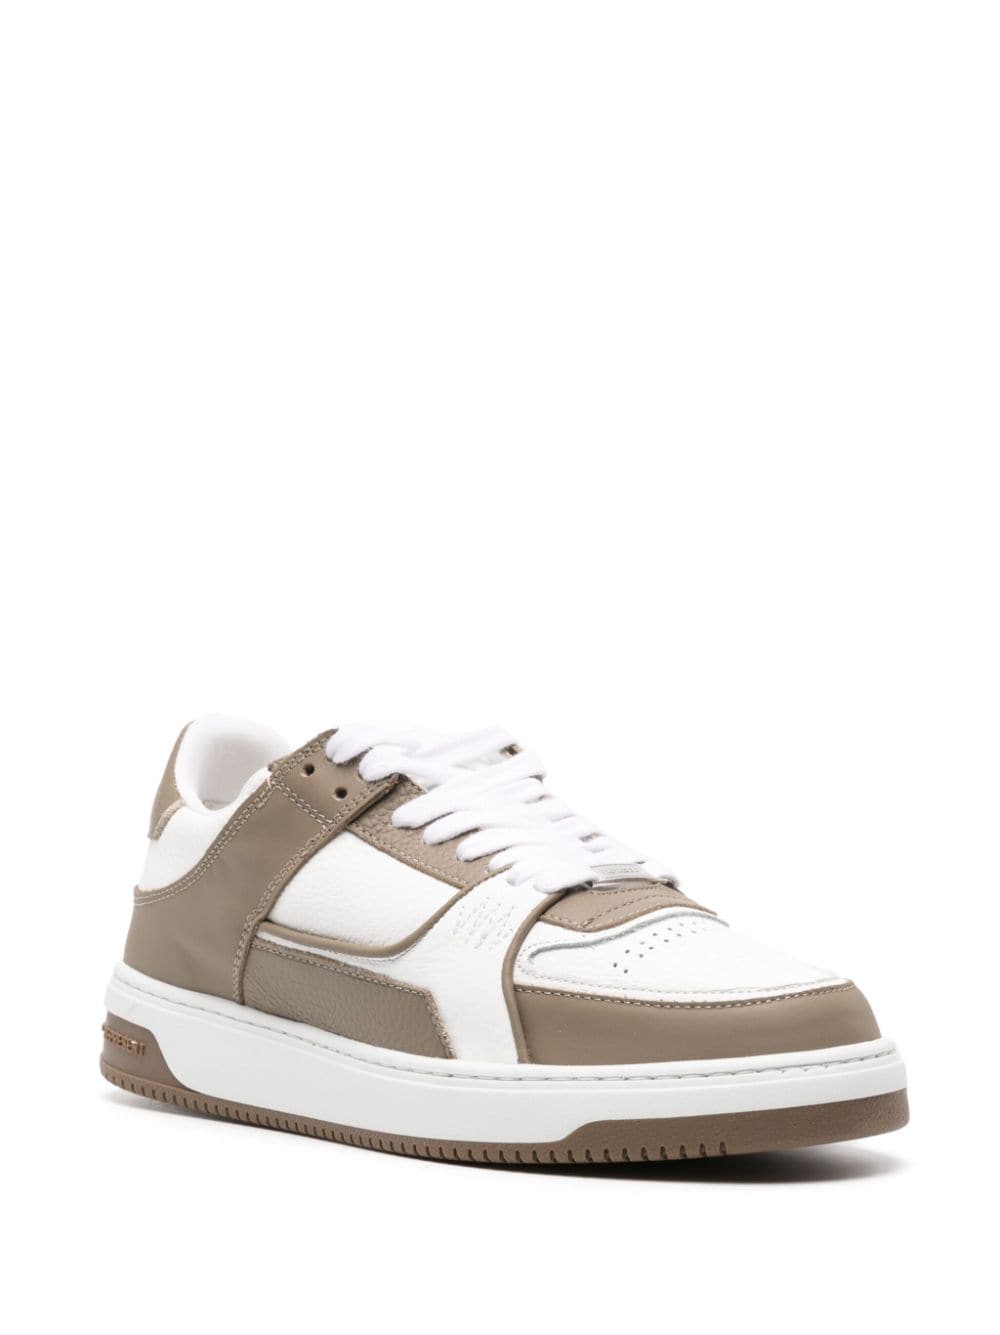 white and brown apex sneaker